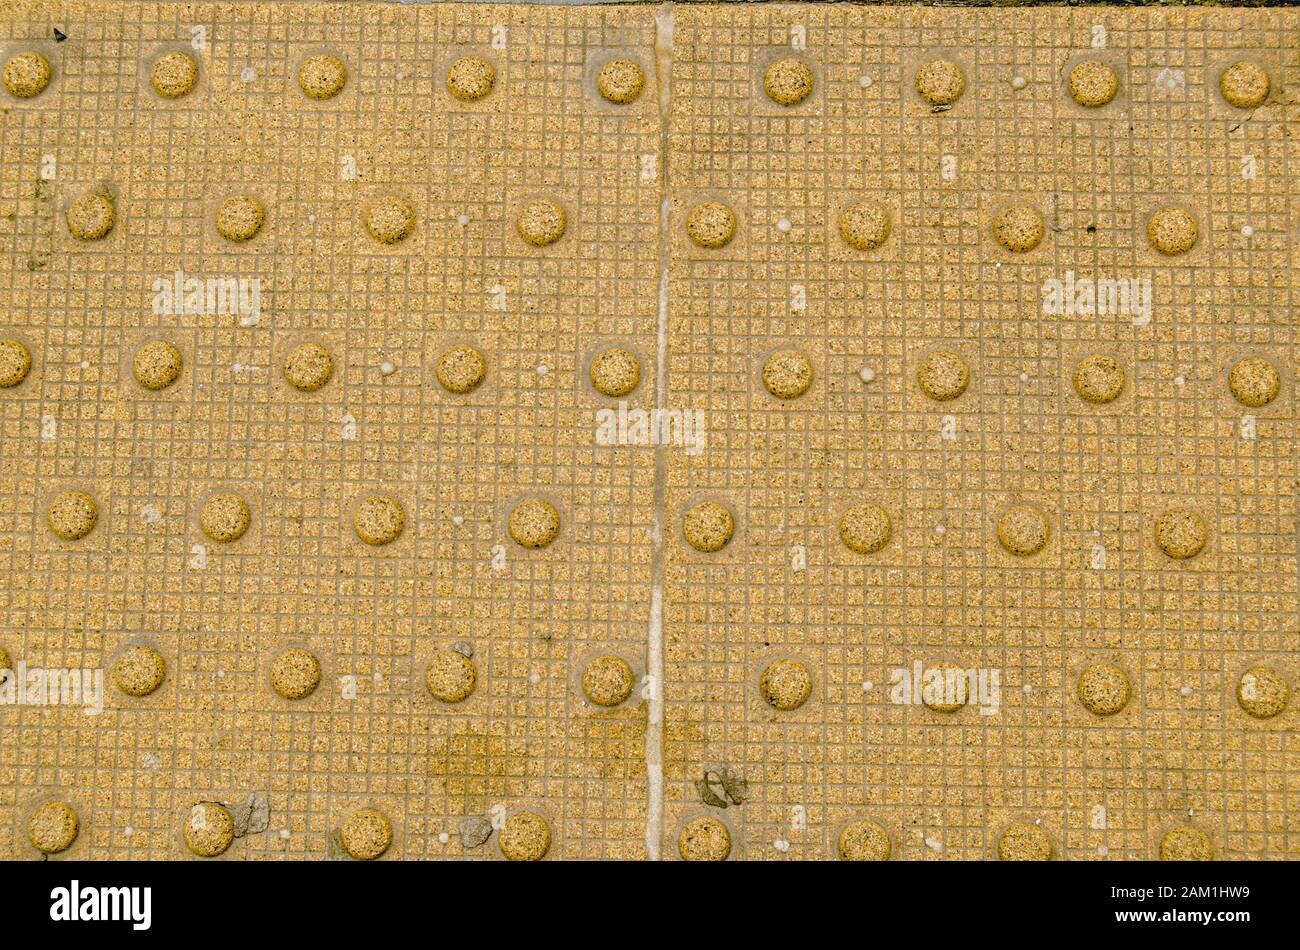 Detail of the internationally used tactile paving to help visually impaired people. These truncated domes are marking the edge of a railway platform. Stock Photo